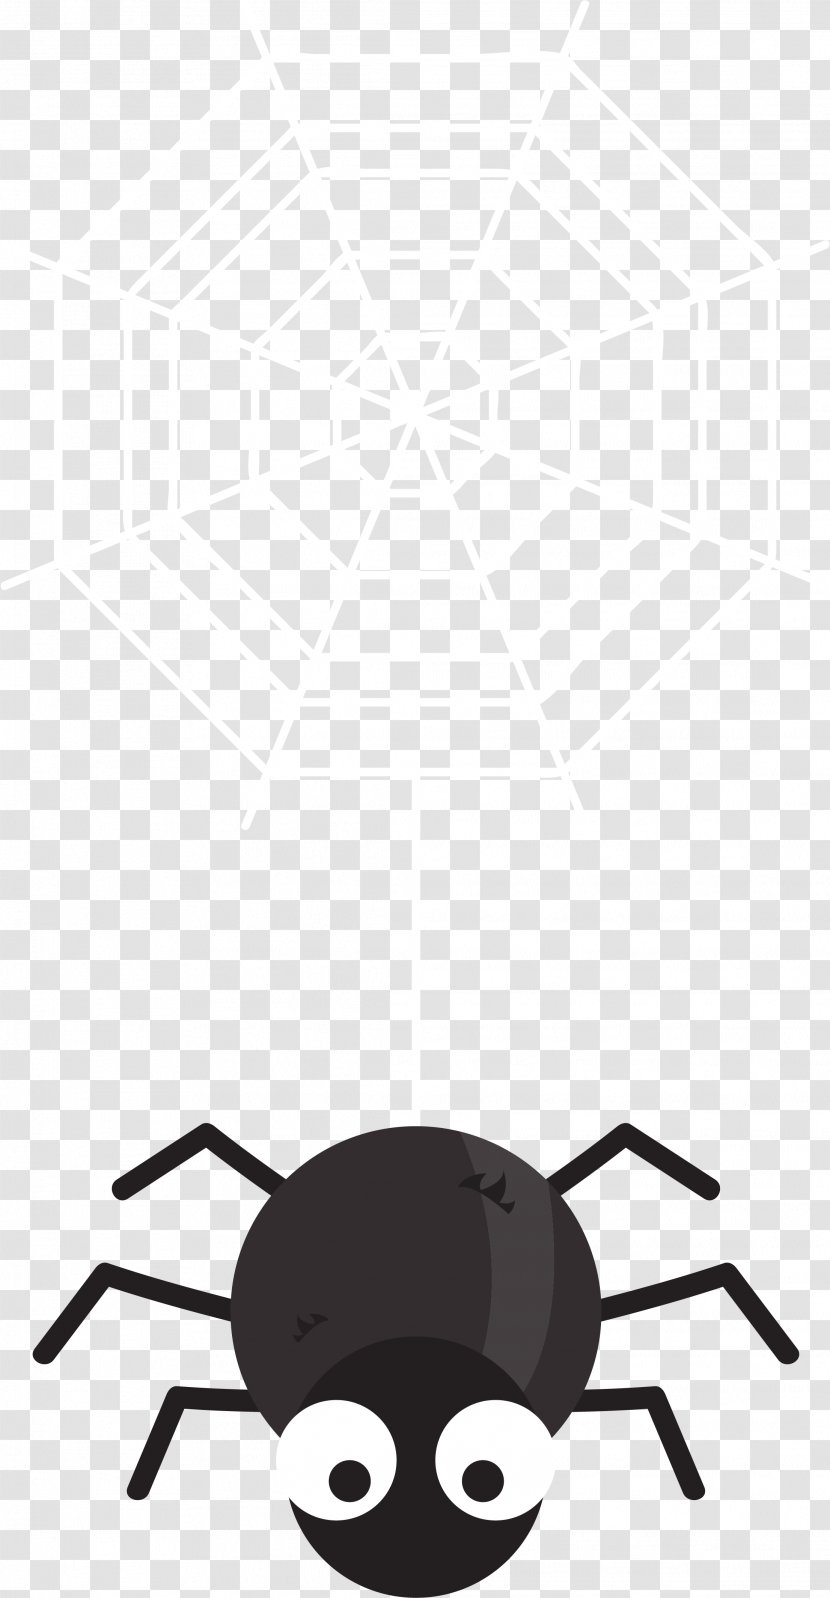 Spider Web Black House - Cartoon Witch Hat Transparent PNG